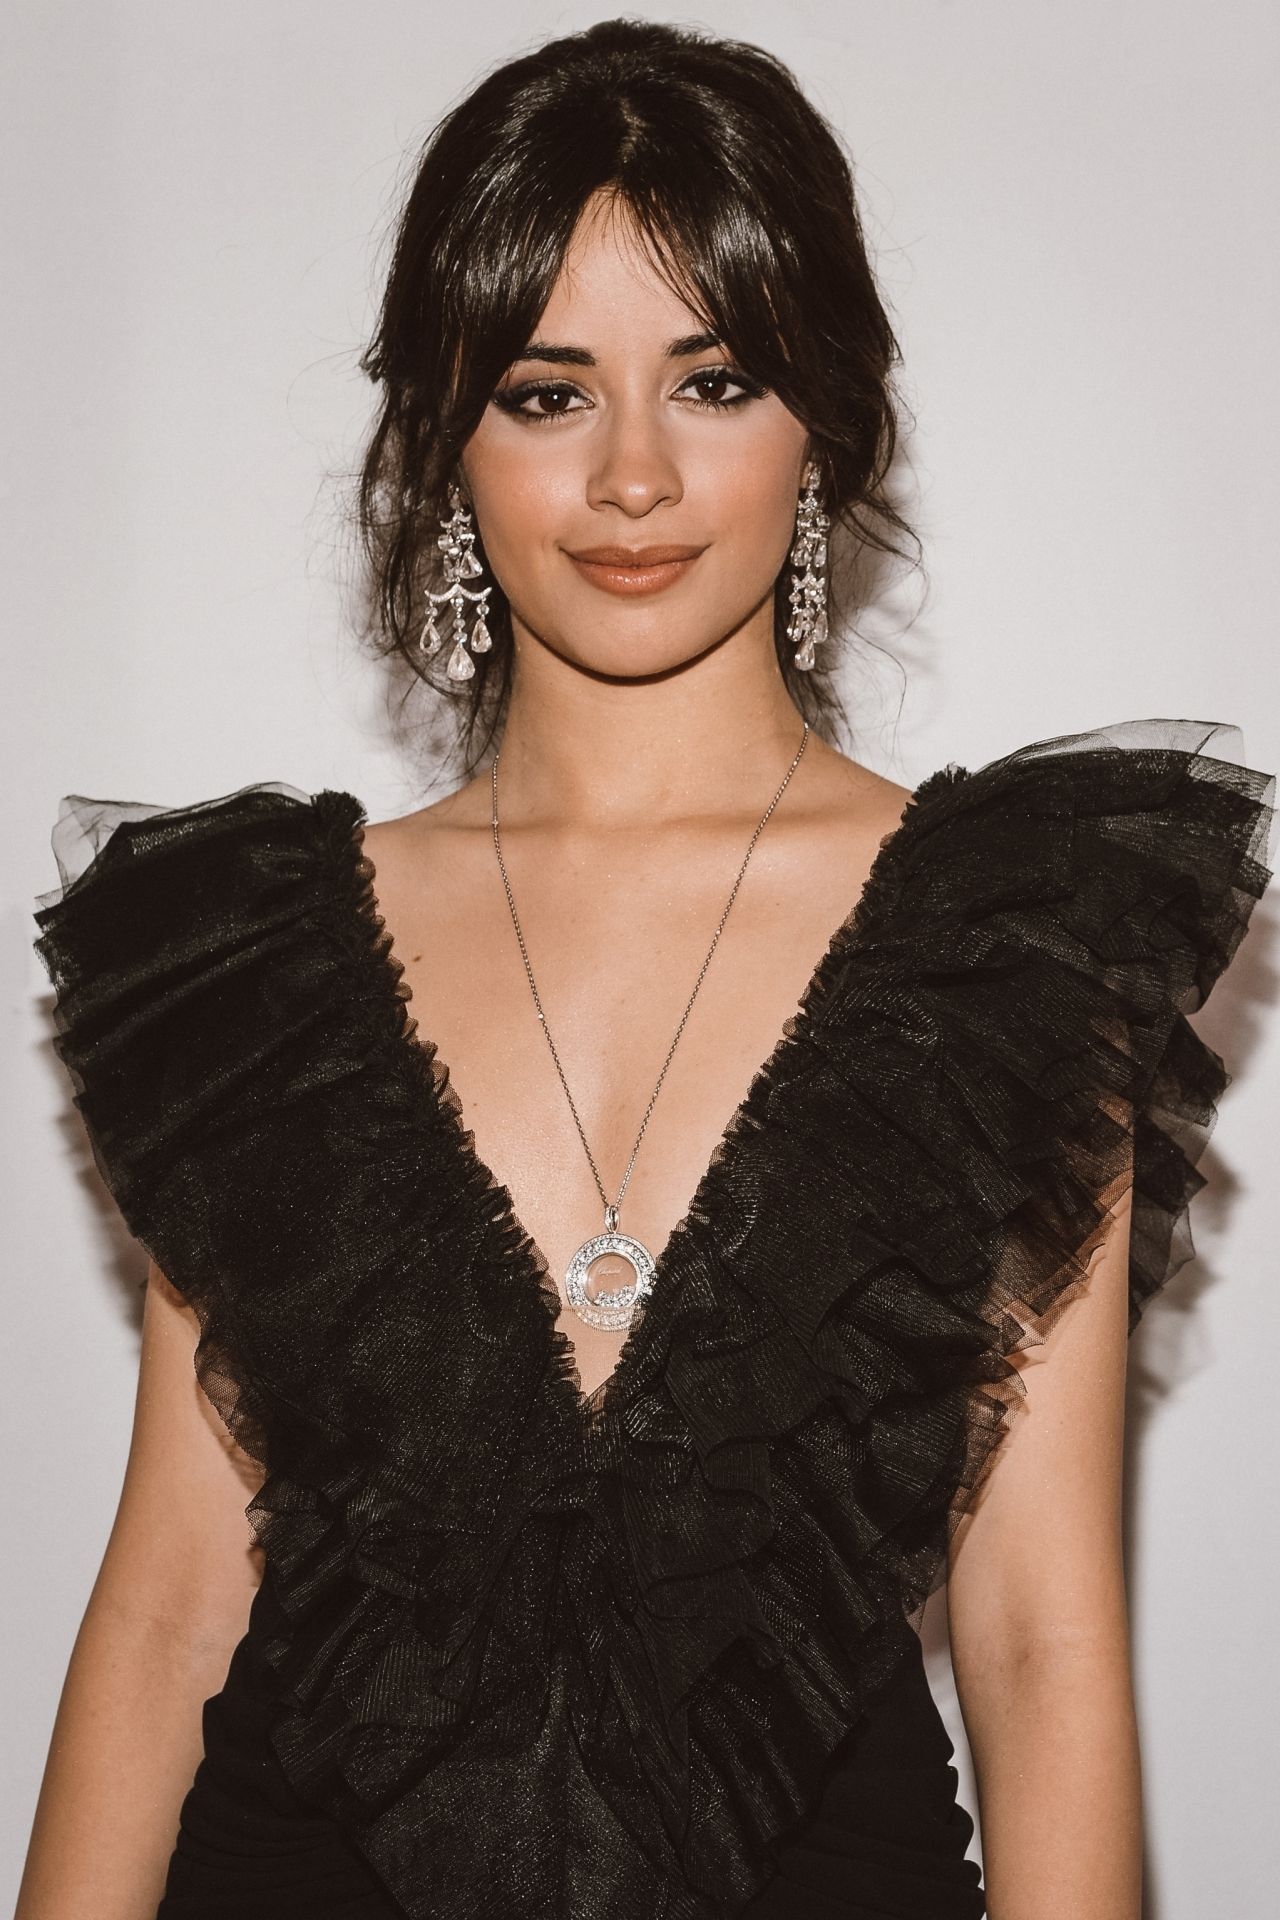 Camila Cabello - Clive Davis and Recording Academy Pre-GRAMMY Photoshooot in NYC1280 x 1920